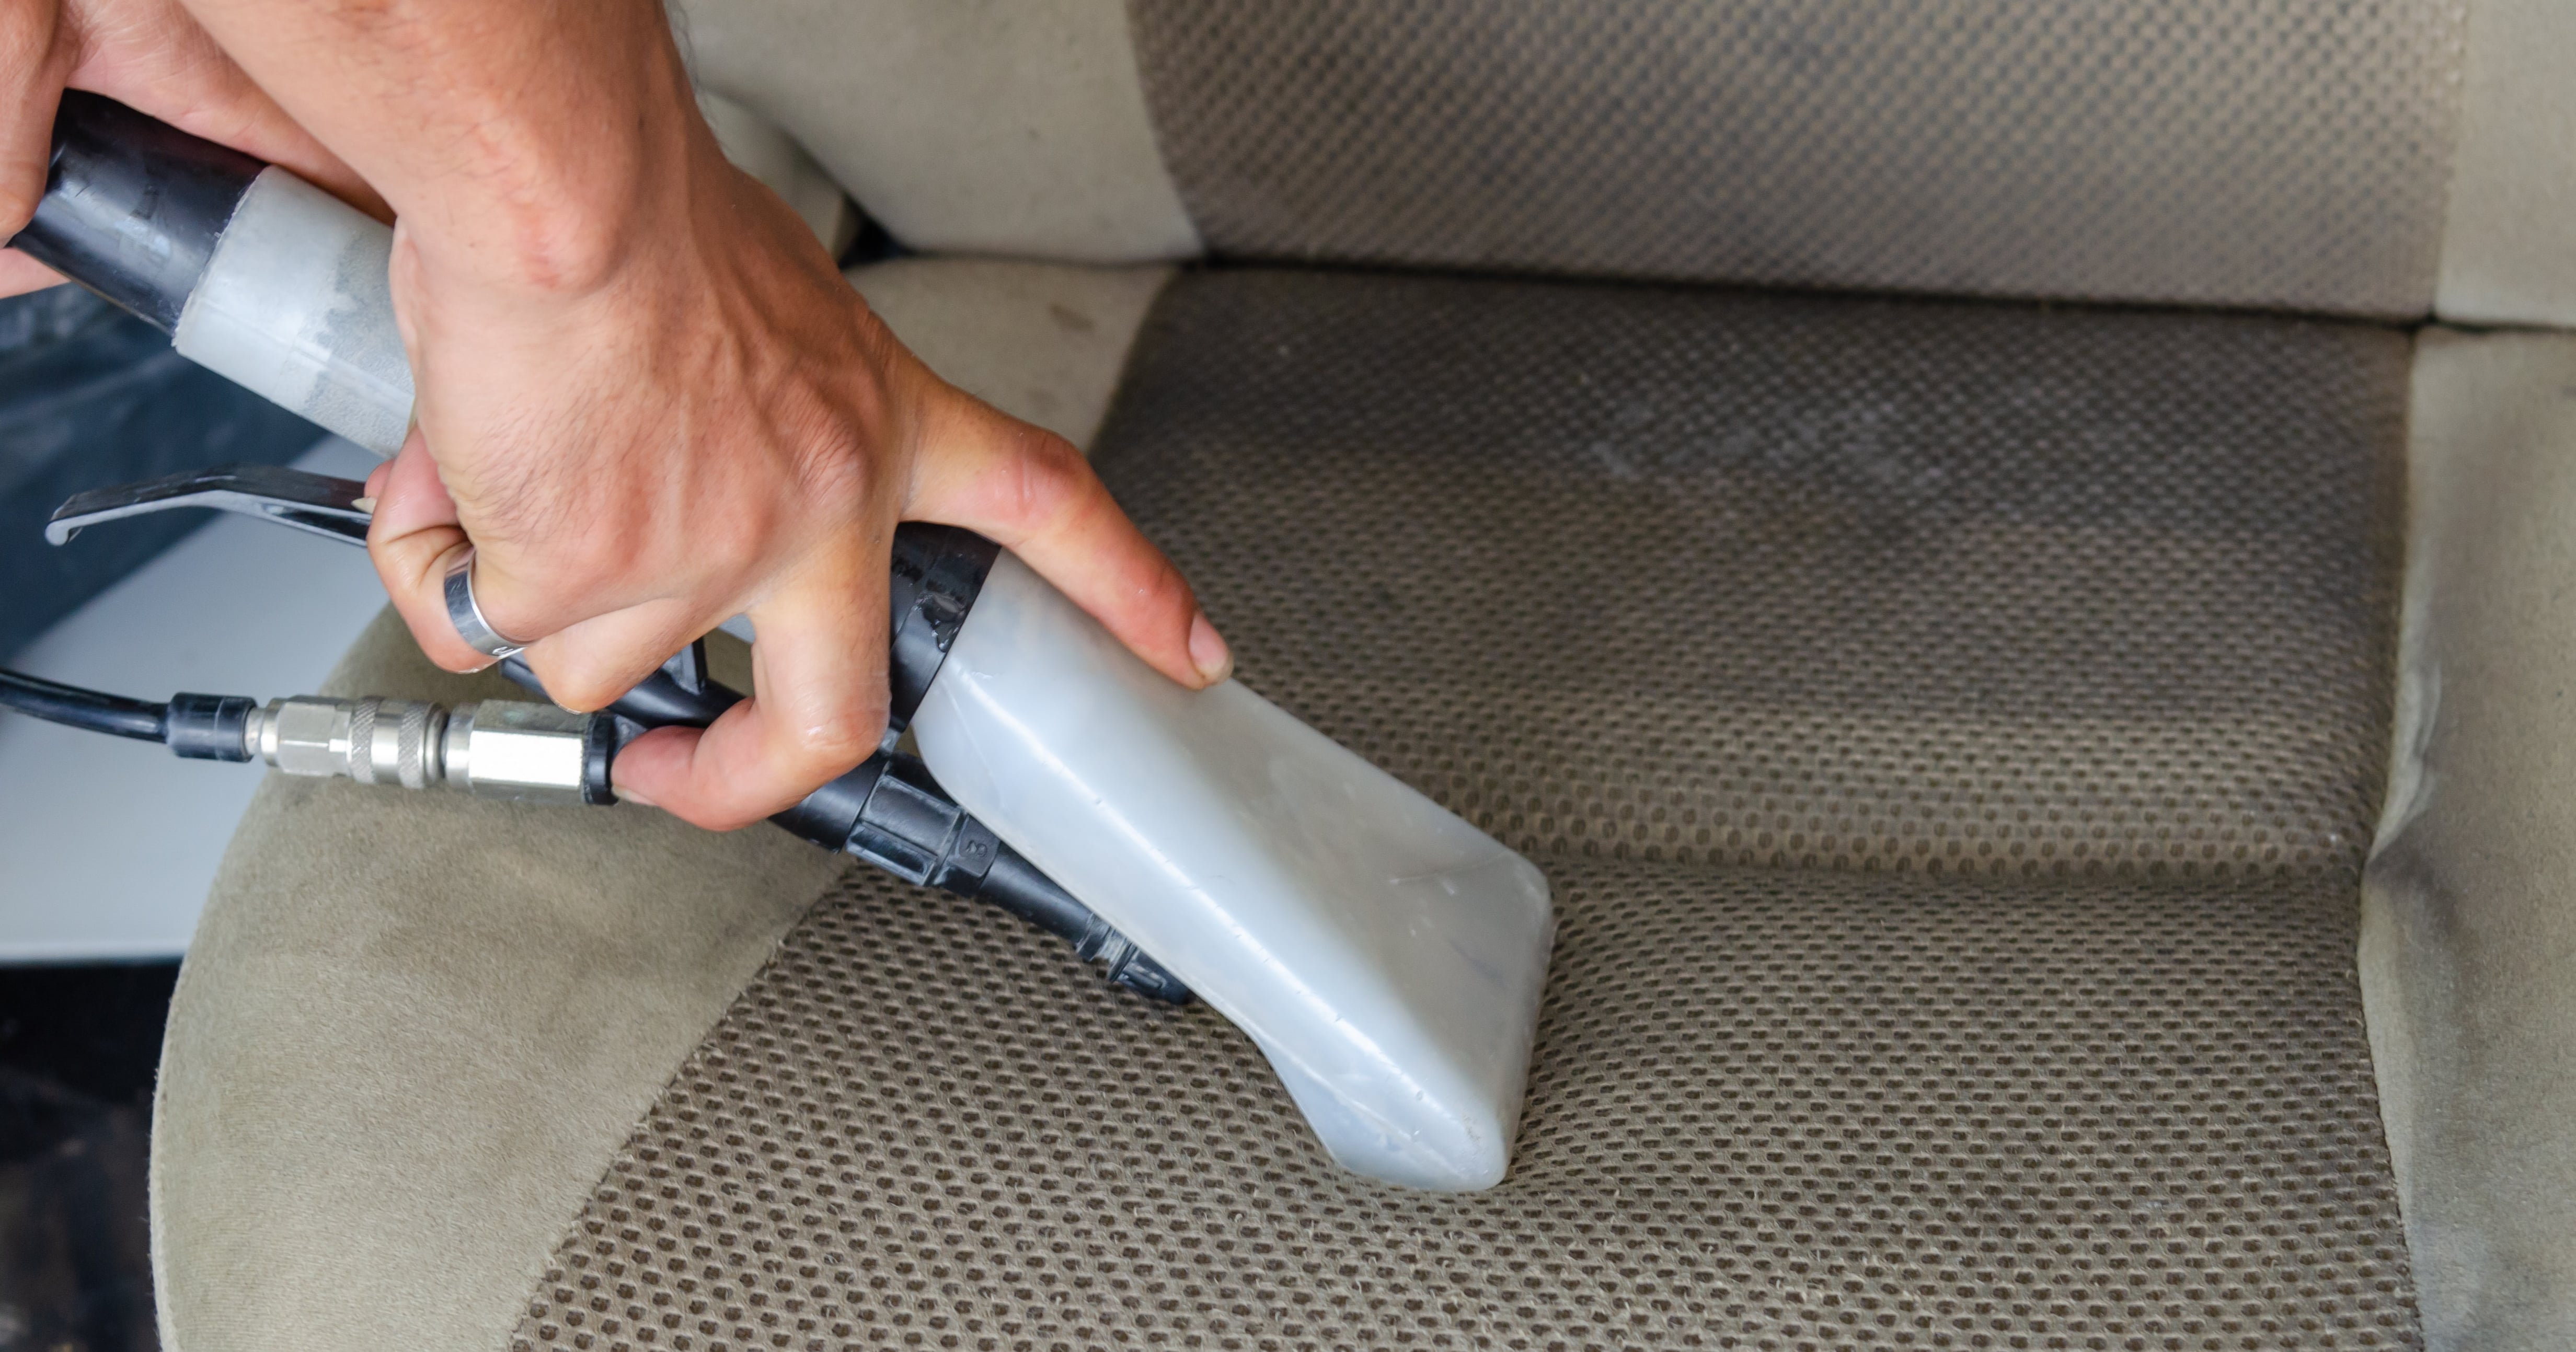 Carpet Cleaner vs. Laundry Soap - HOW TO CLEAN CAR MATS 